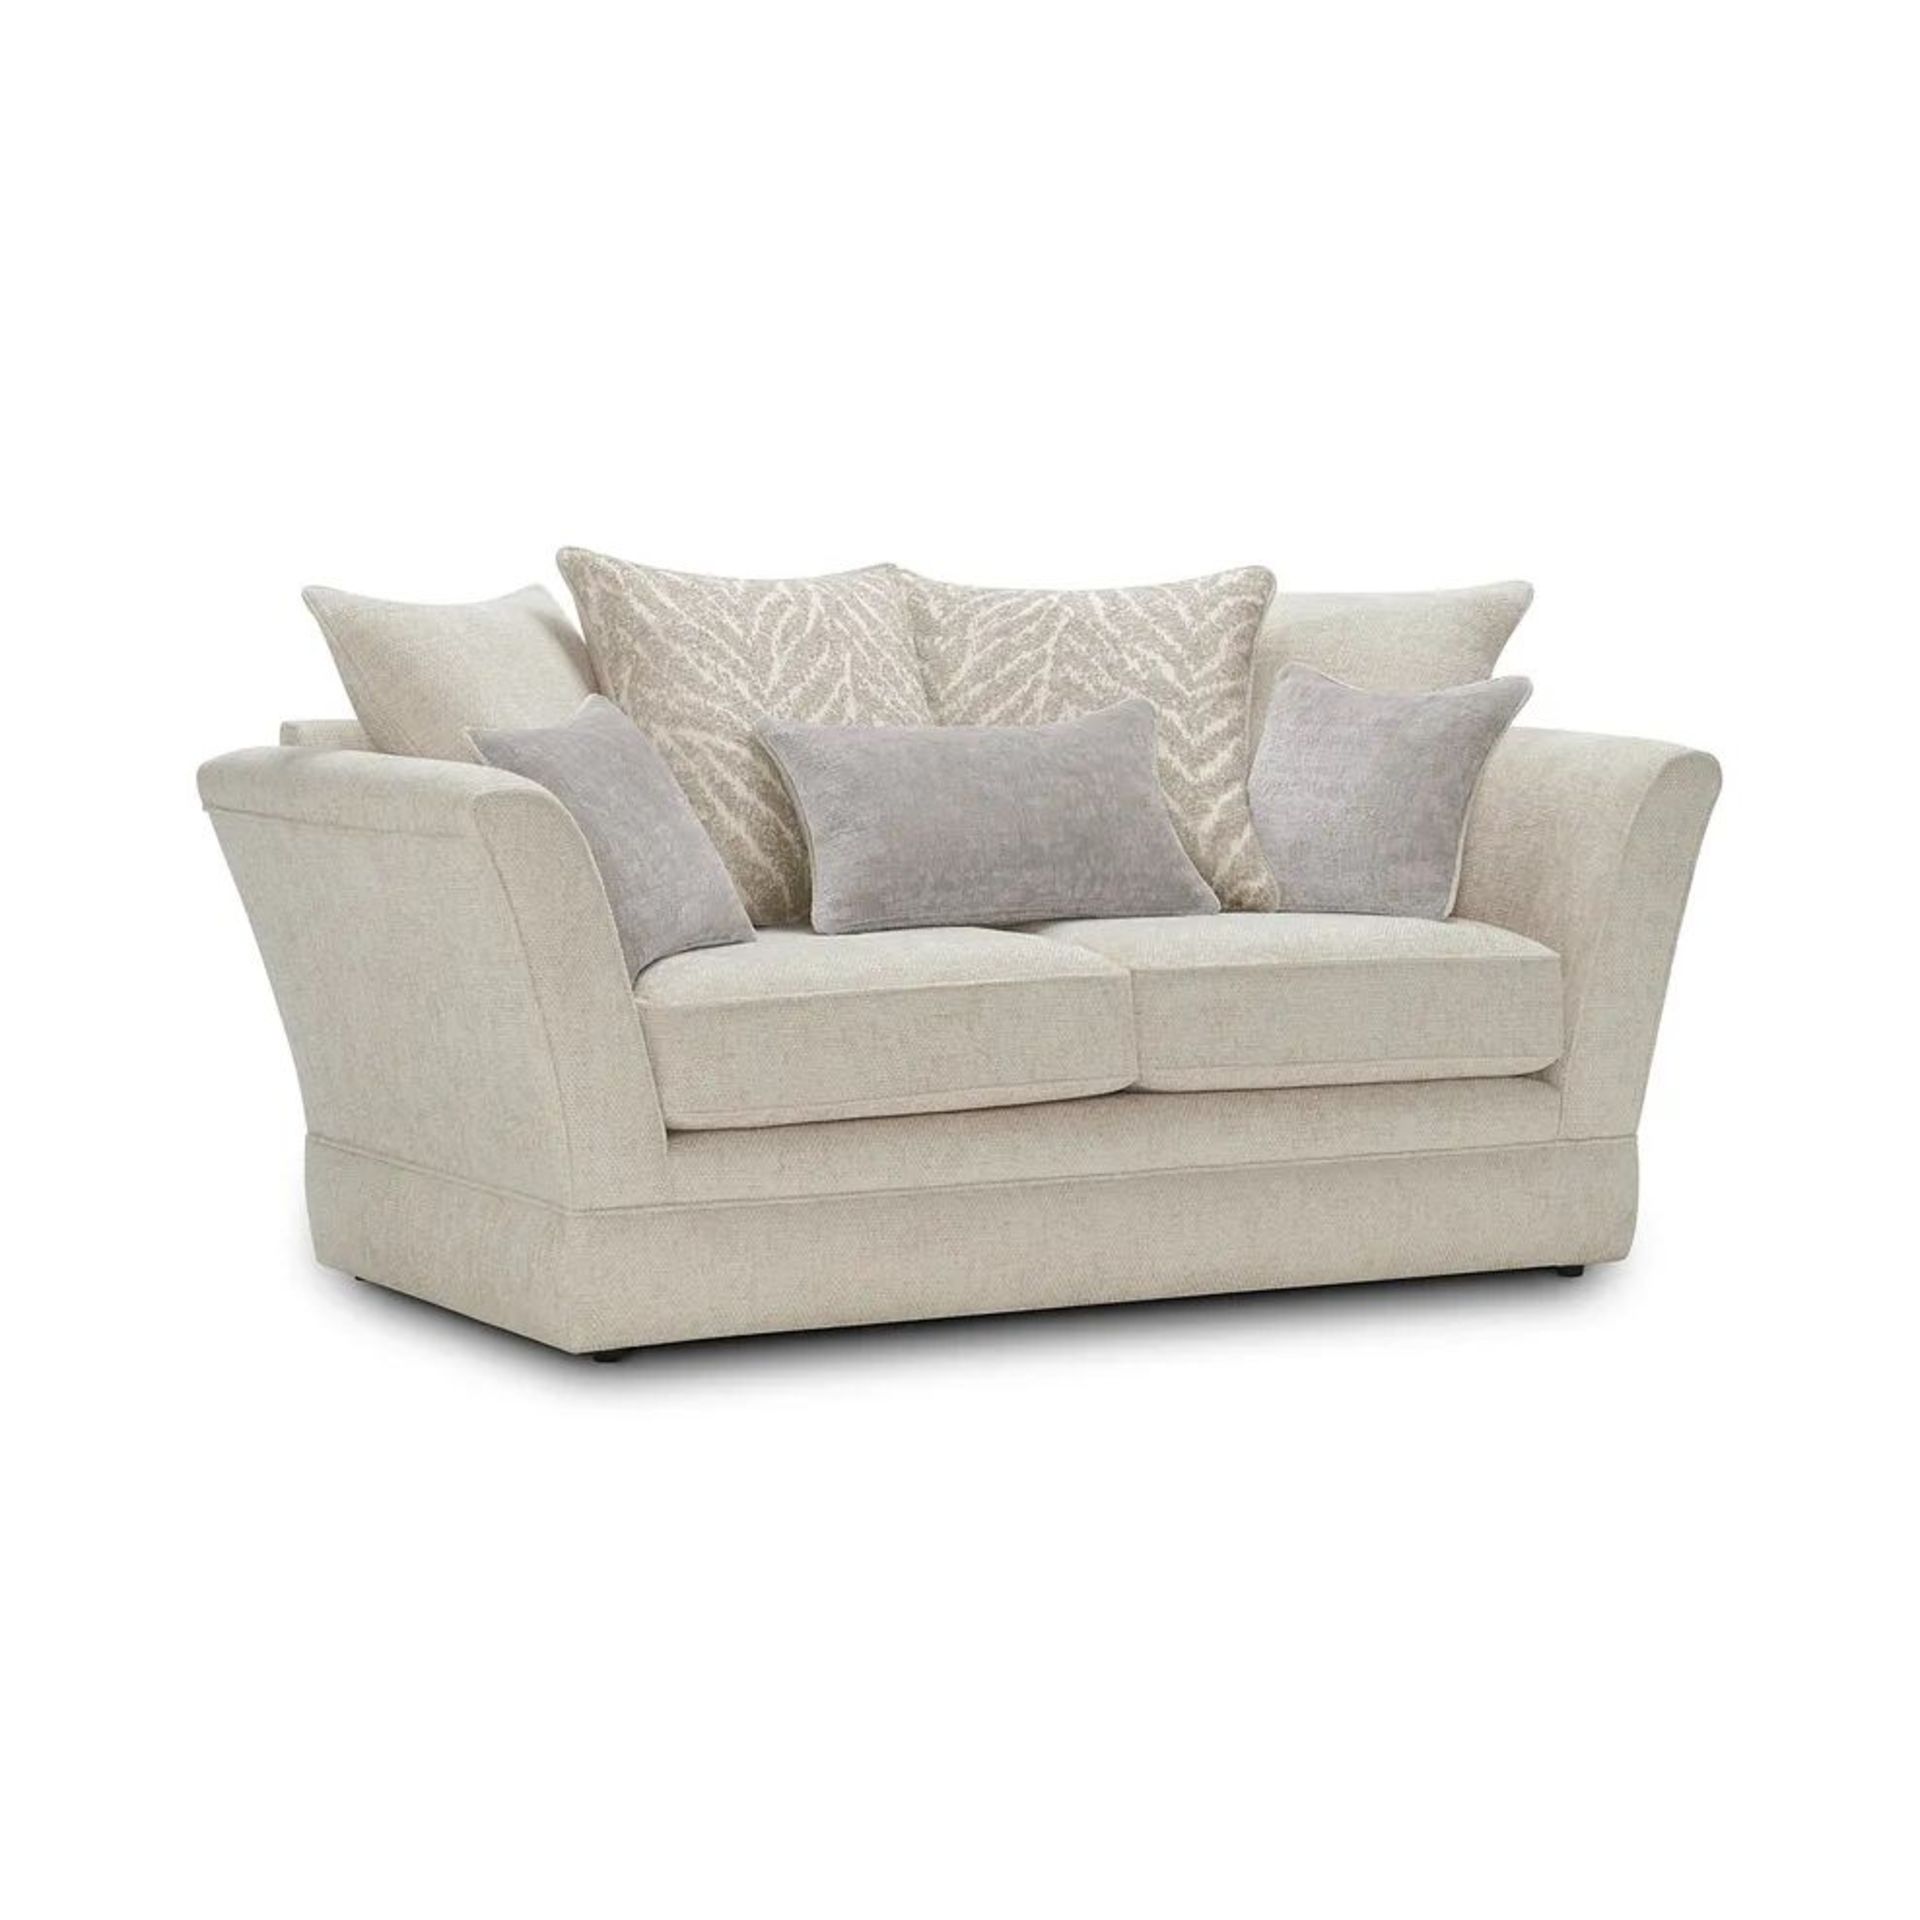 BRAND NEW CARRINGTON 2 Seater Pillow Back Sofa - NATURAL FABRIC. RRP £999. Make our 3-seater